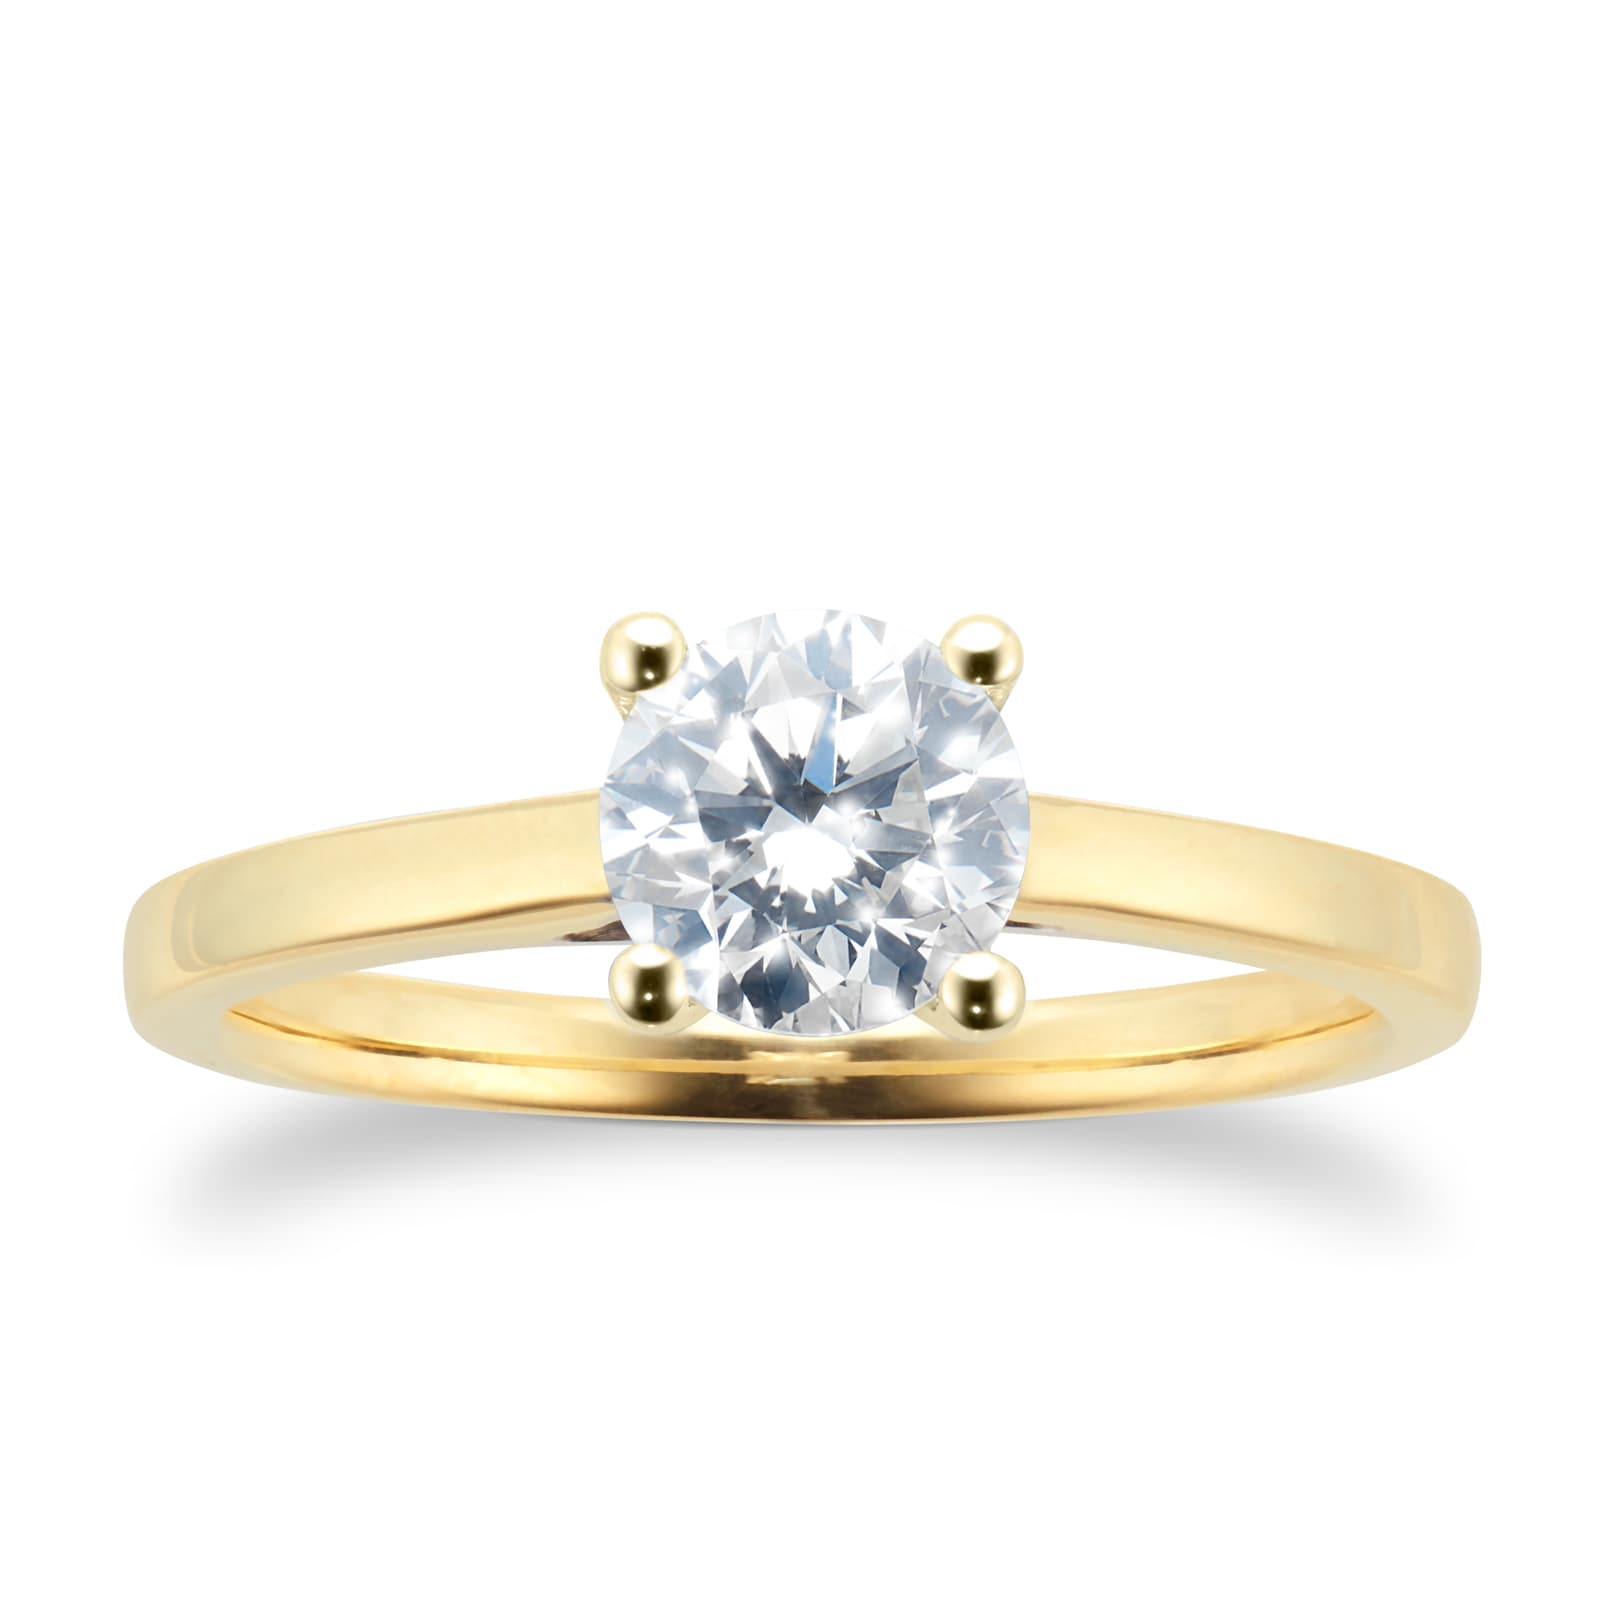 18ct Yellow Gold 1.00cttw Diamond Solitaire Engagement Ring - Ring Size Q